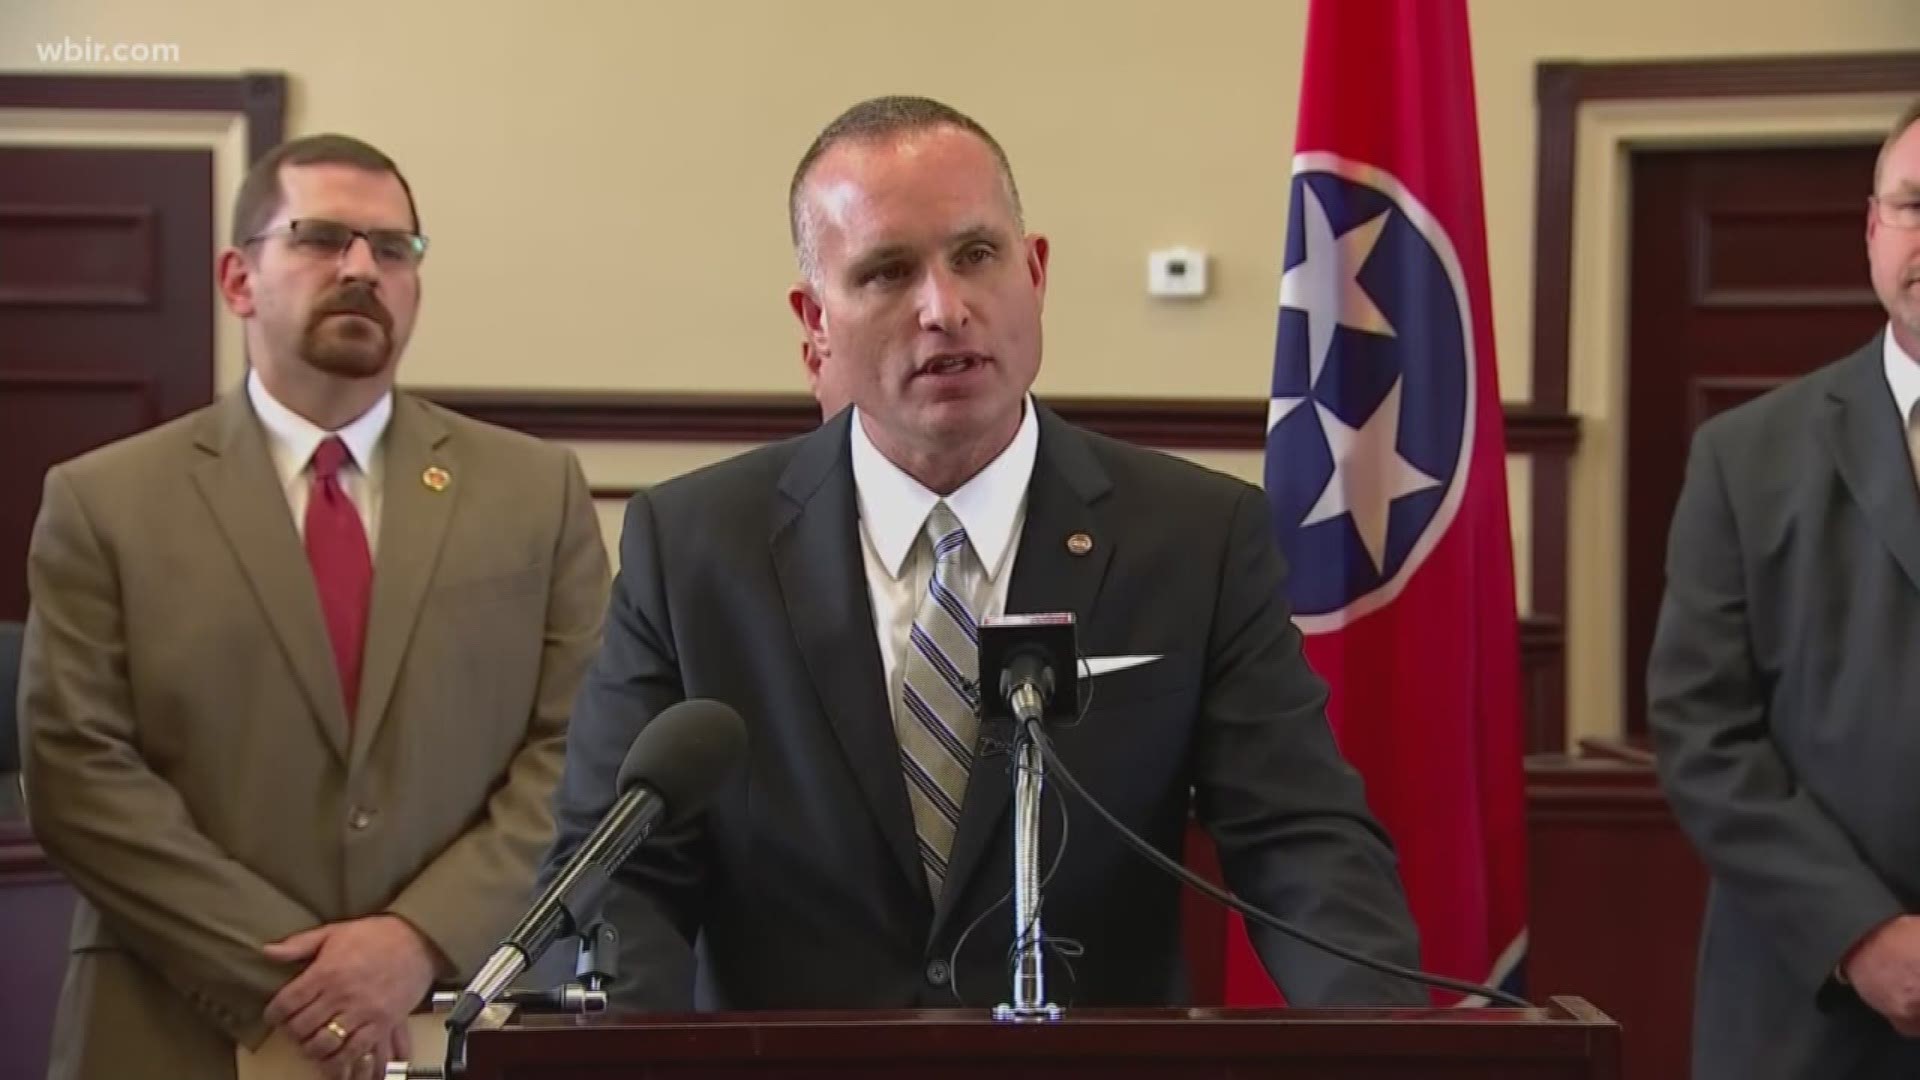 The Governor's Office opened an internal investigation into acting TBI director Jason Locke after his wife complained that he used state money during an affair with another state employee. June 18, 2018.